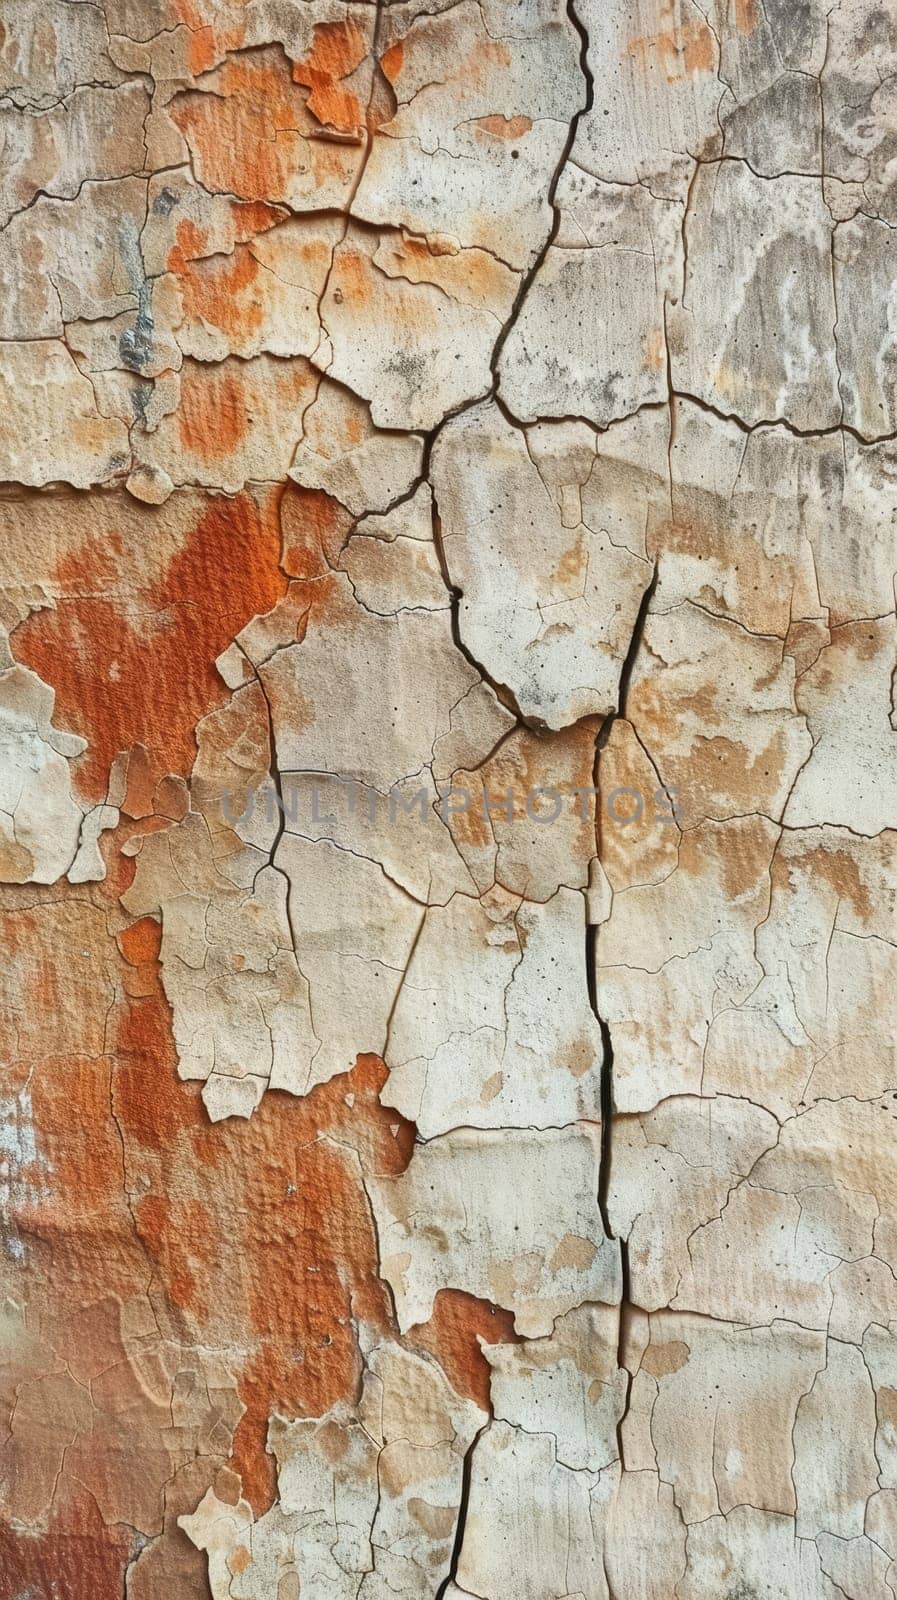 This image captures the warm, earthen textures of cracked soil, reflecting a natural palette of the desert landscape